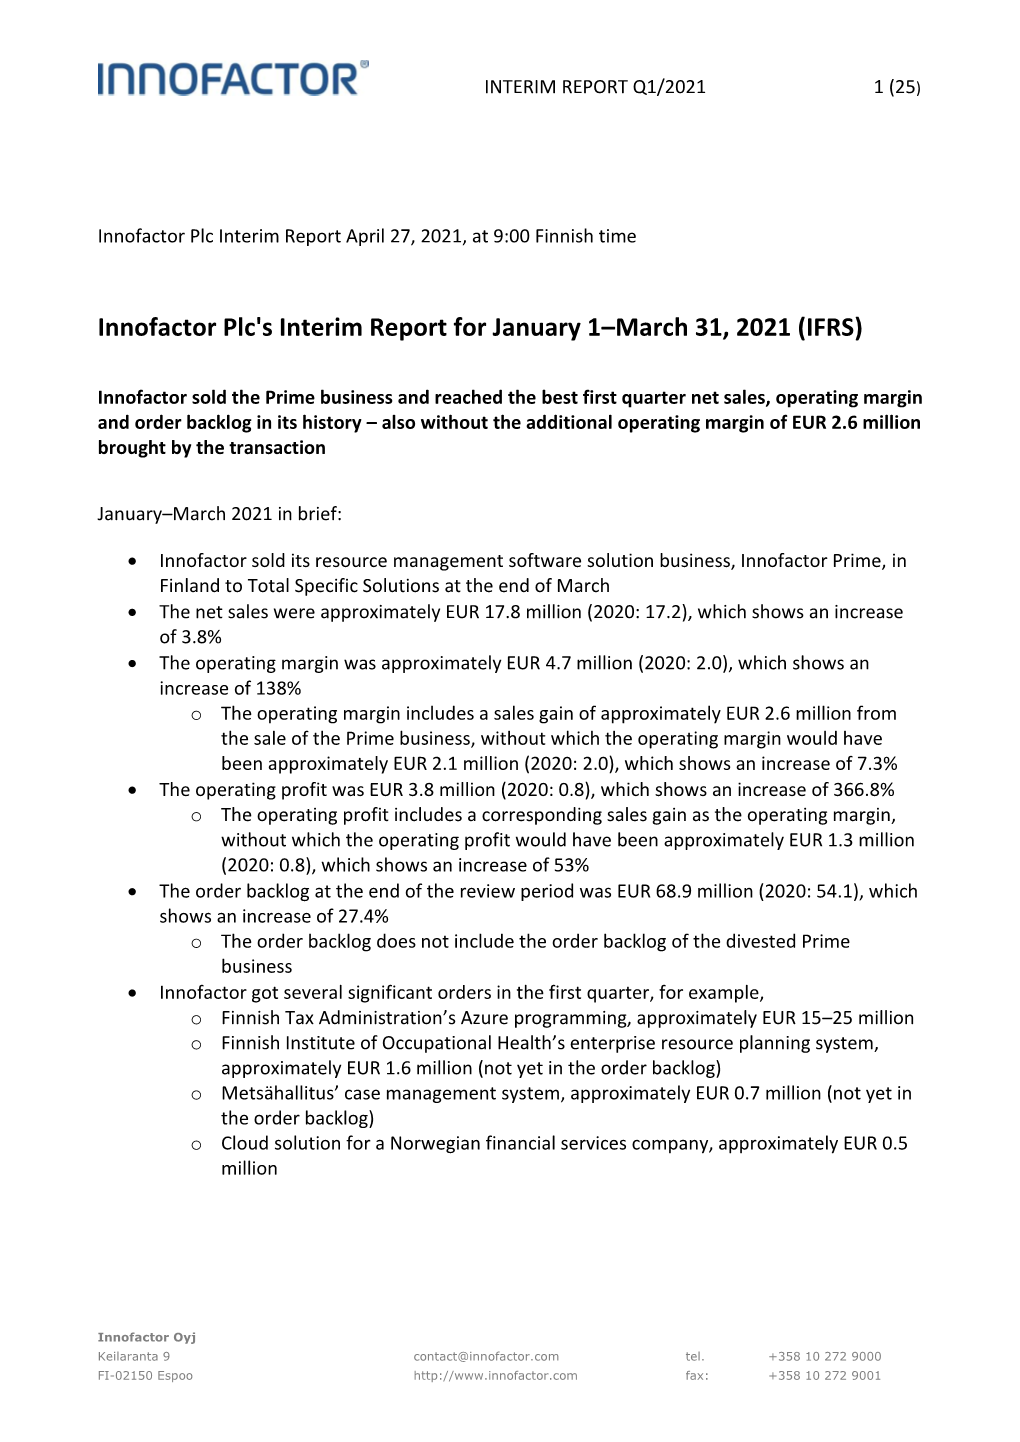 Innofactor Plc's Interim Report for January 1–March 31, 2021 (IFRS)